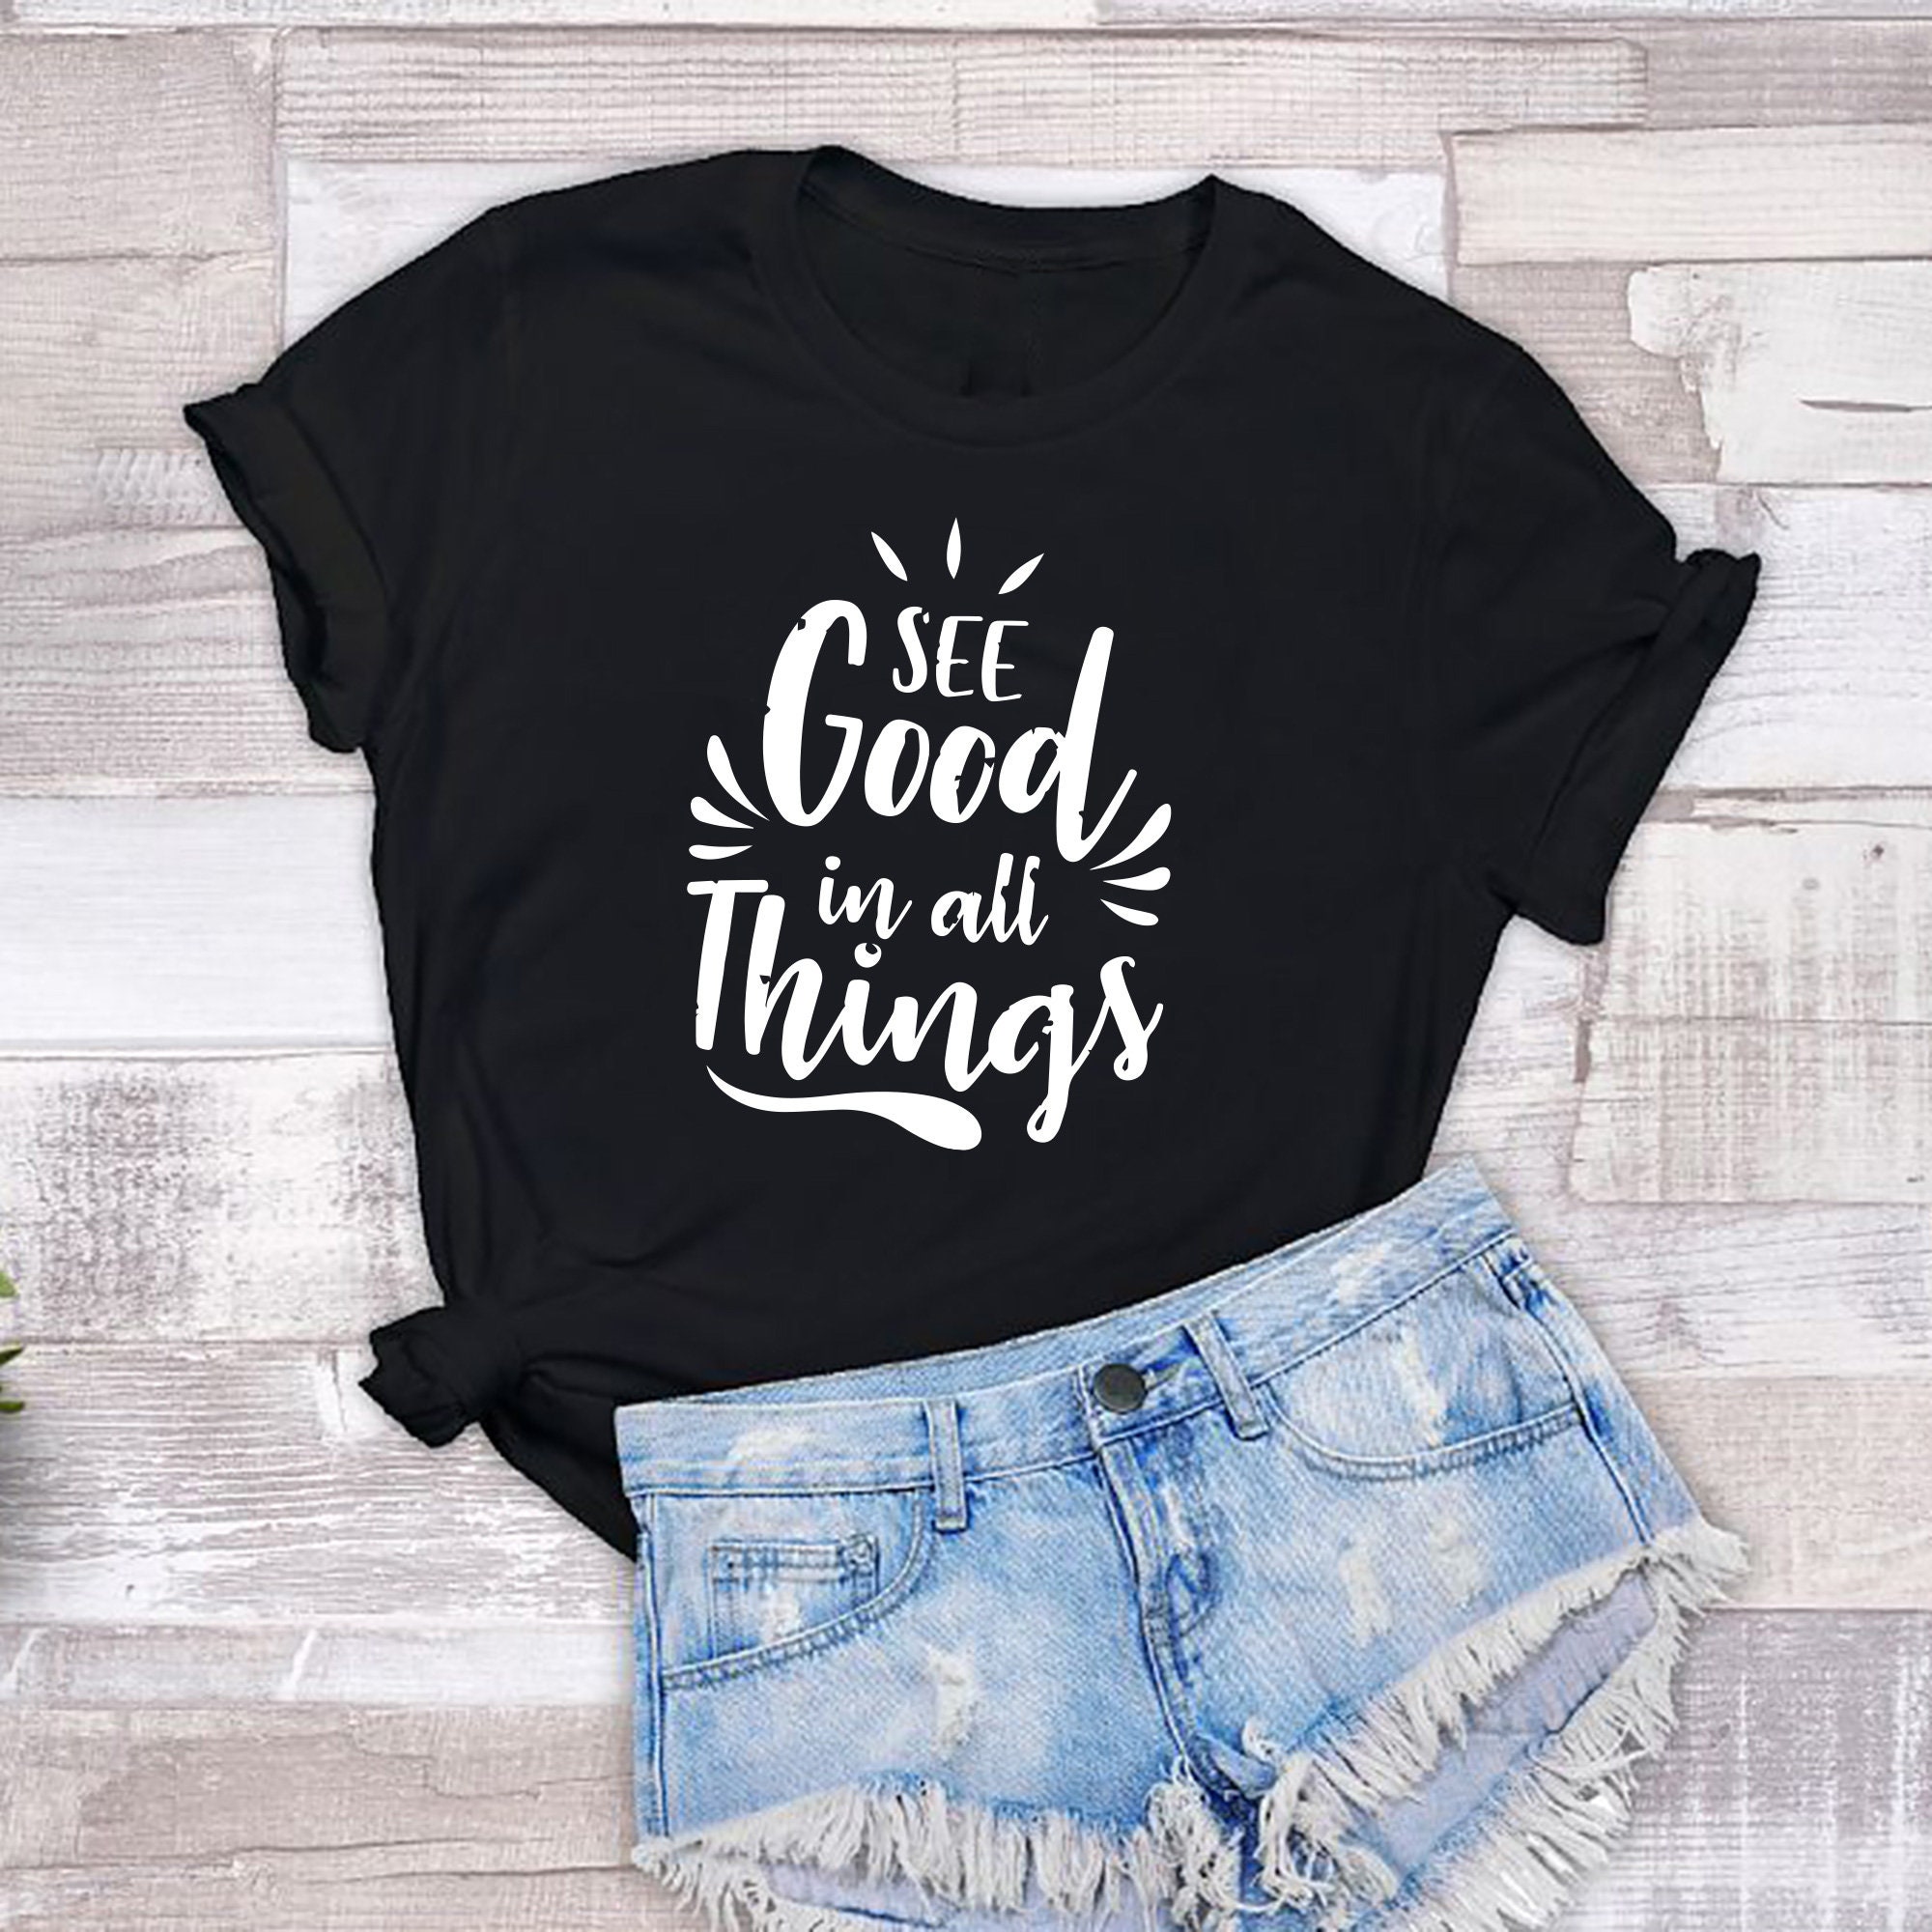 See the good in all things ladies tee lovely passionate quote | Etsy